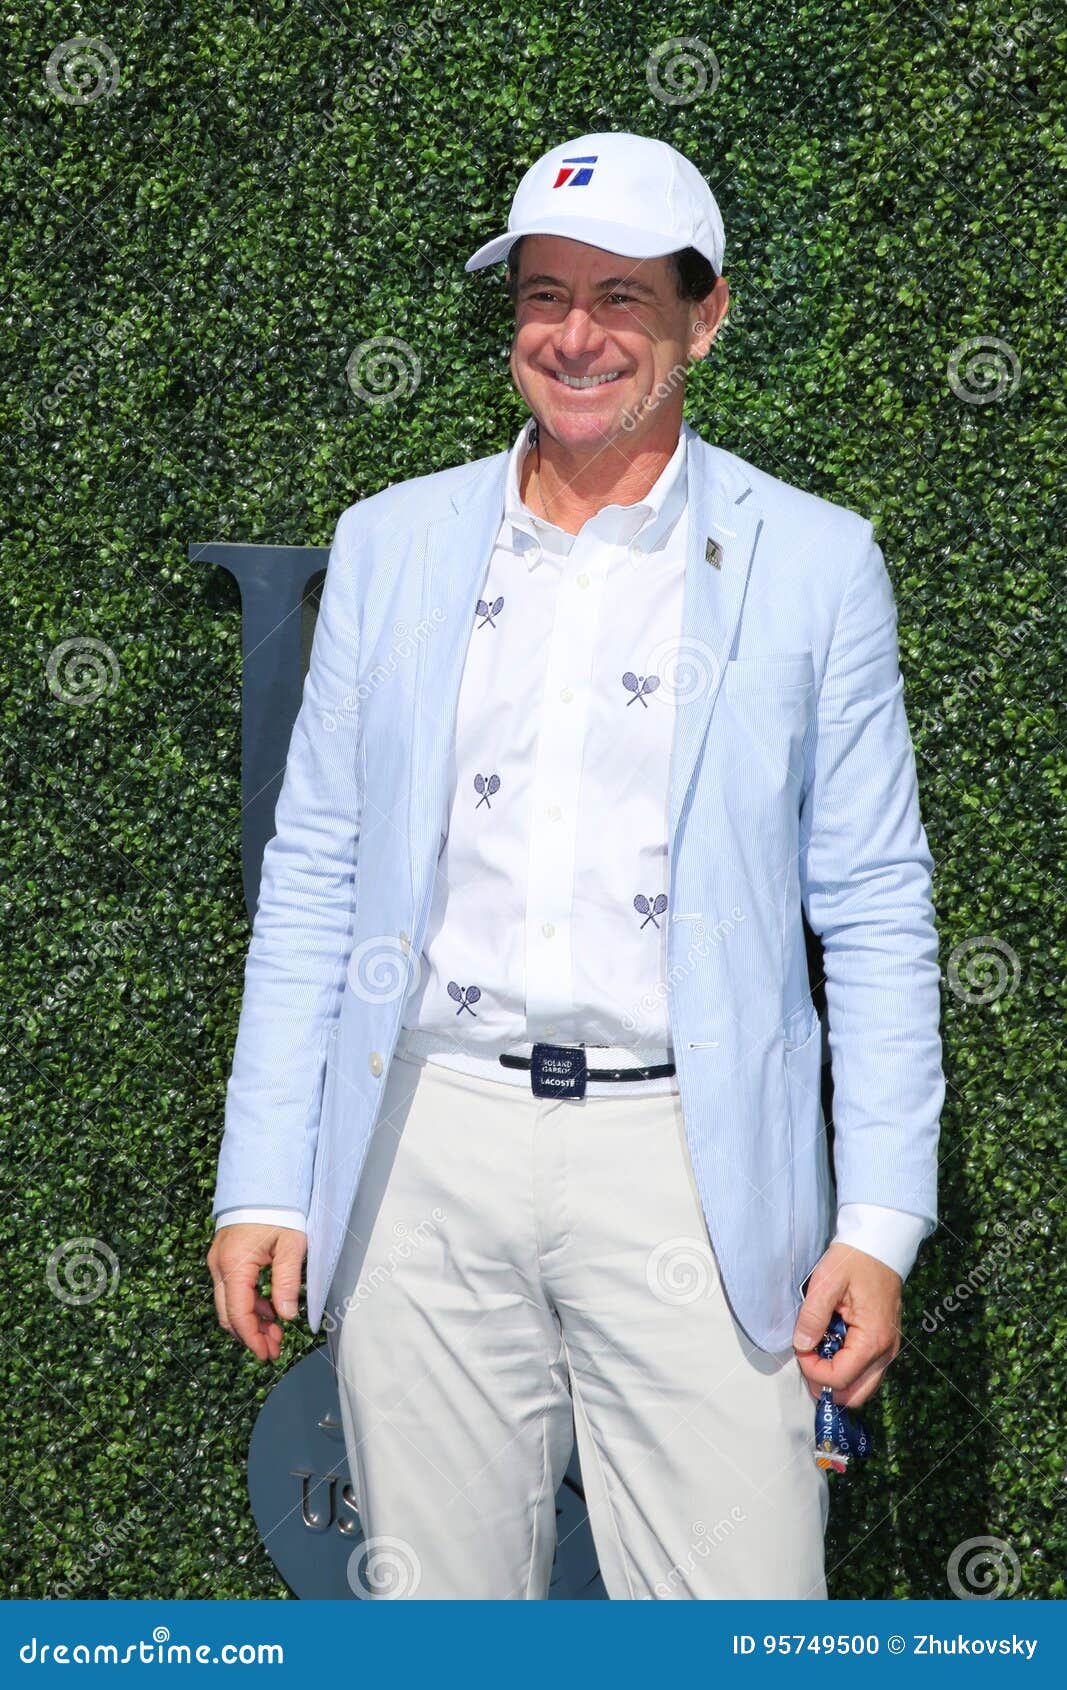 Chairman of the Board and CEO of the Tennis Channel Ken Solomon at the Red Carpet before US Open 2016 Men`s Final Match Editorial Image